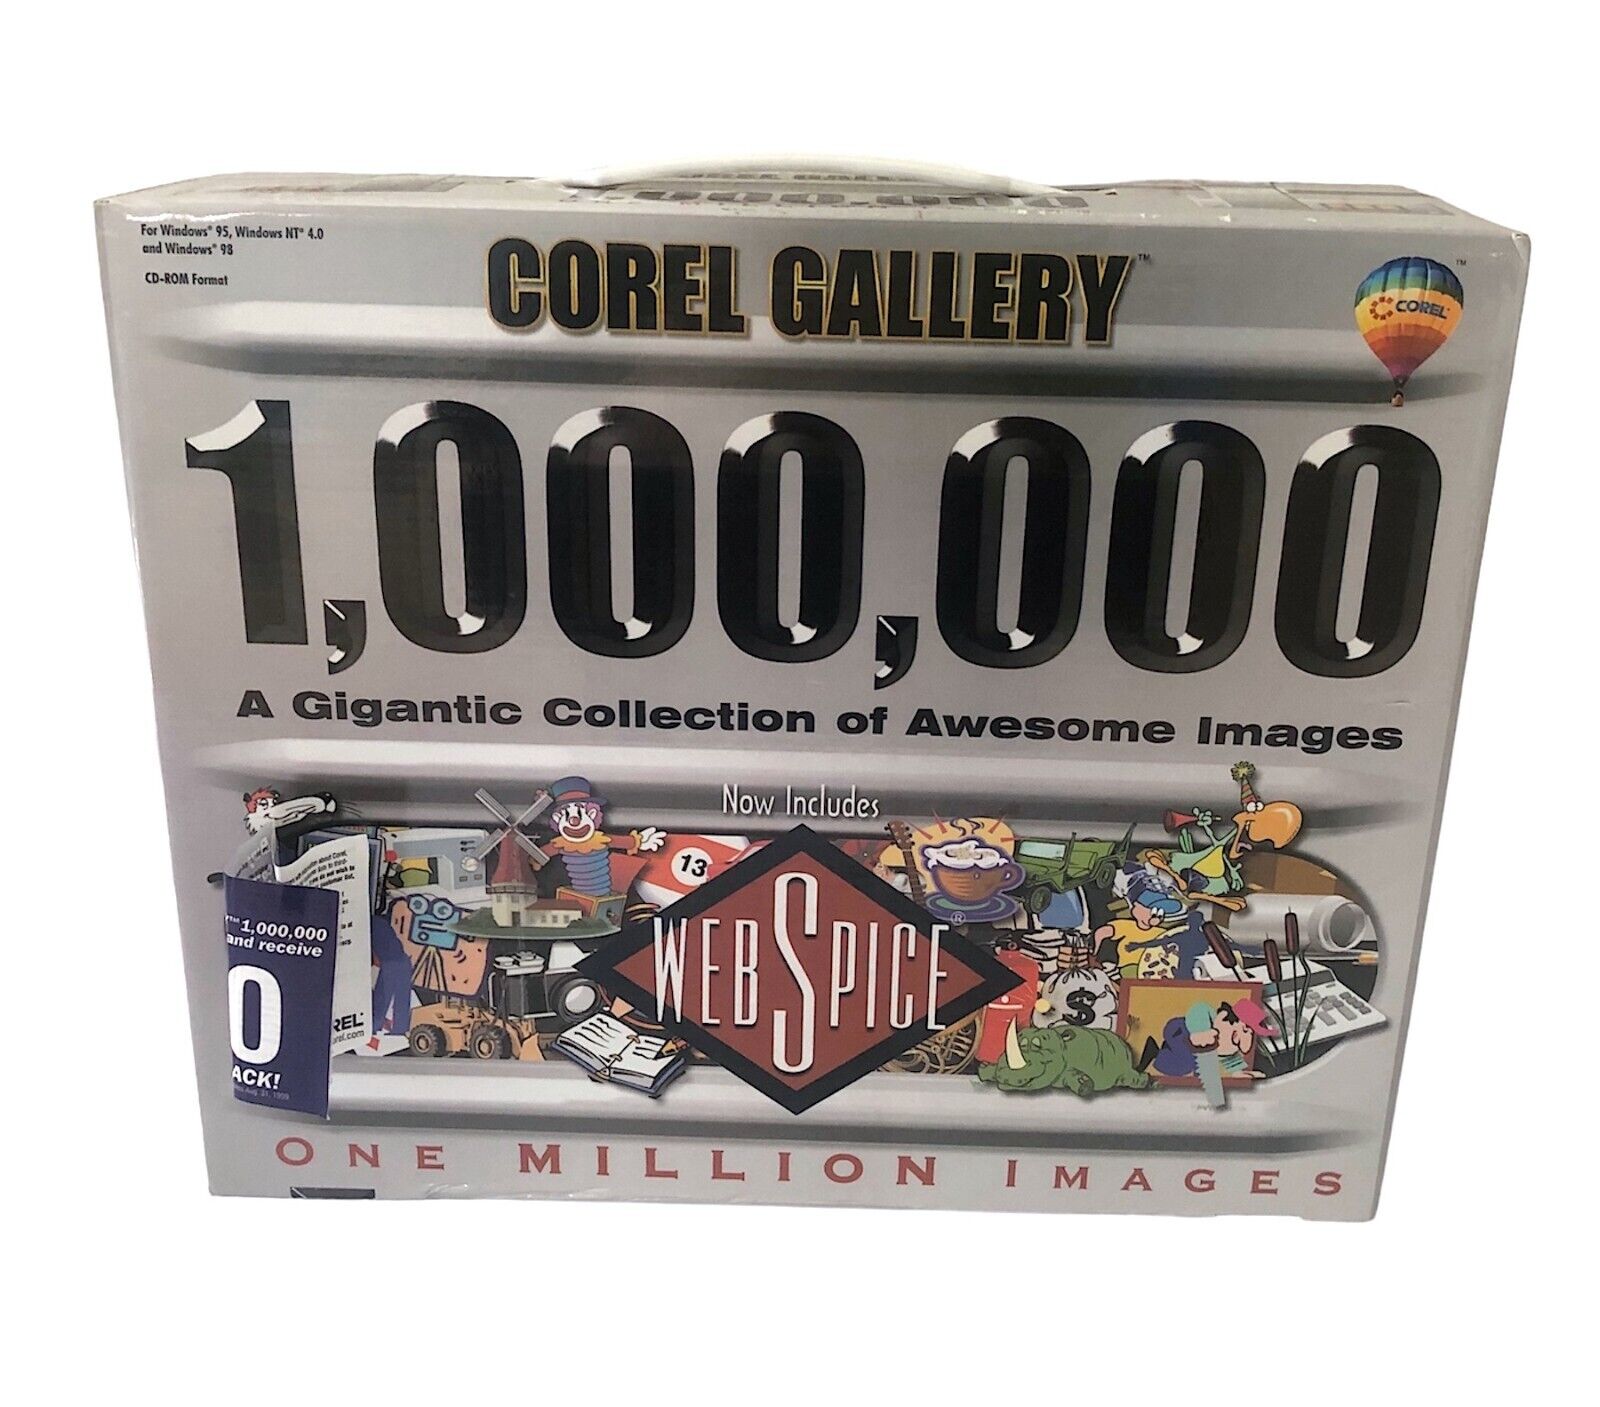 Corel Gallery 1000000 Images Vintage Clipart CD-ROM Windows 95 & 98 NEW 14 Discs